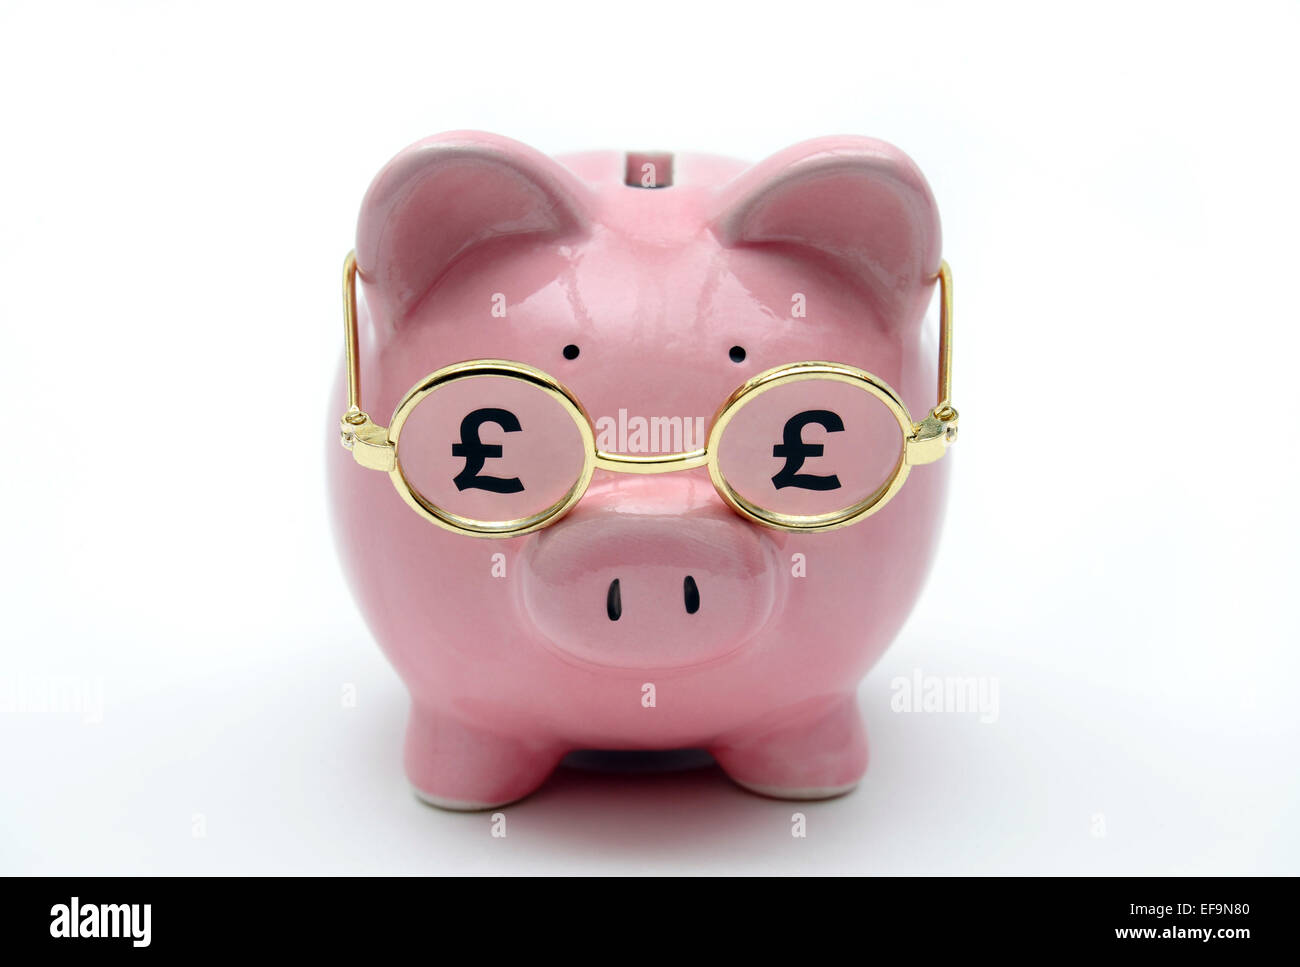 PIGGY BANK WEARING GLASSES WITH POUND SIGNS RE PENSIONS PENSION SCHEME SAVINGS RETIREMENT NESTEGG COMPANY PRIVATE INCOME CASH UK Stock Photo